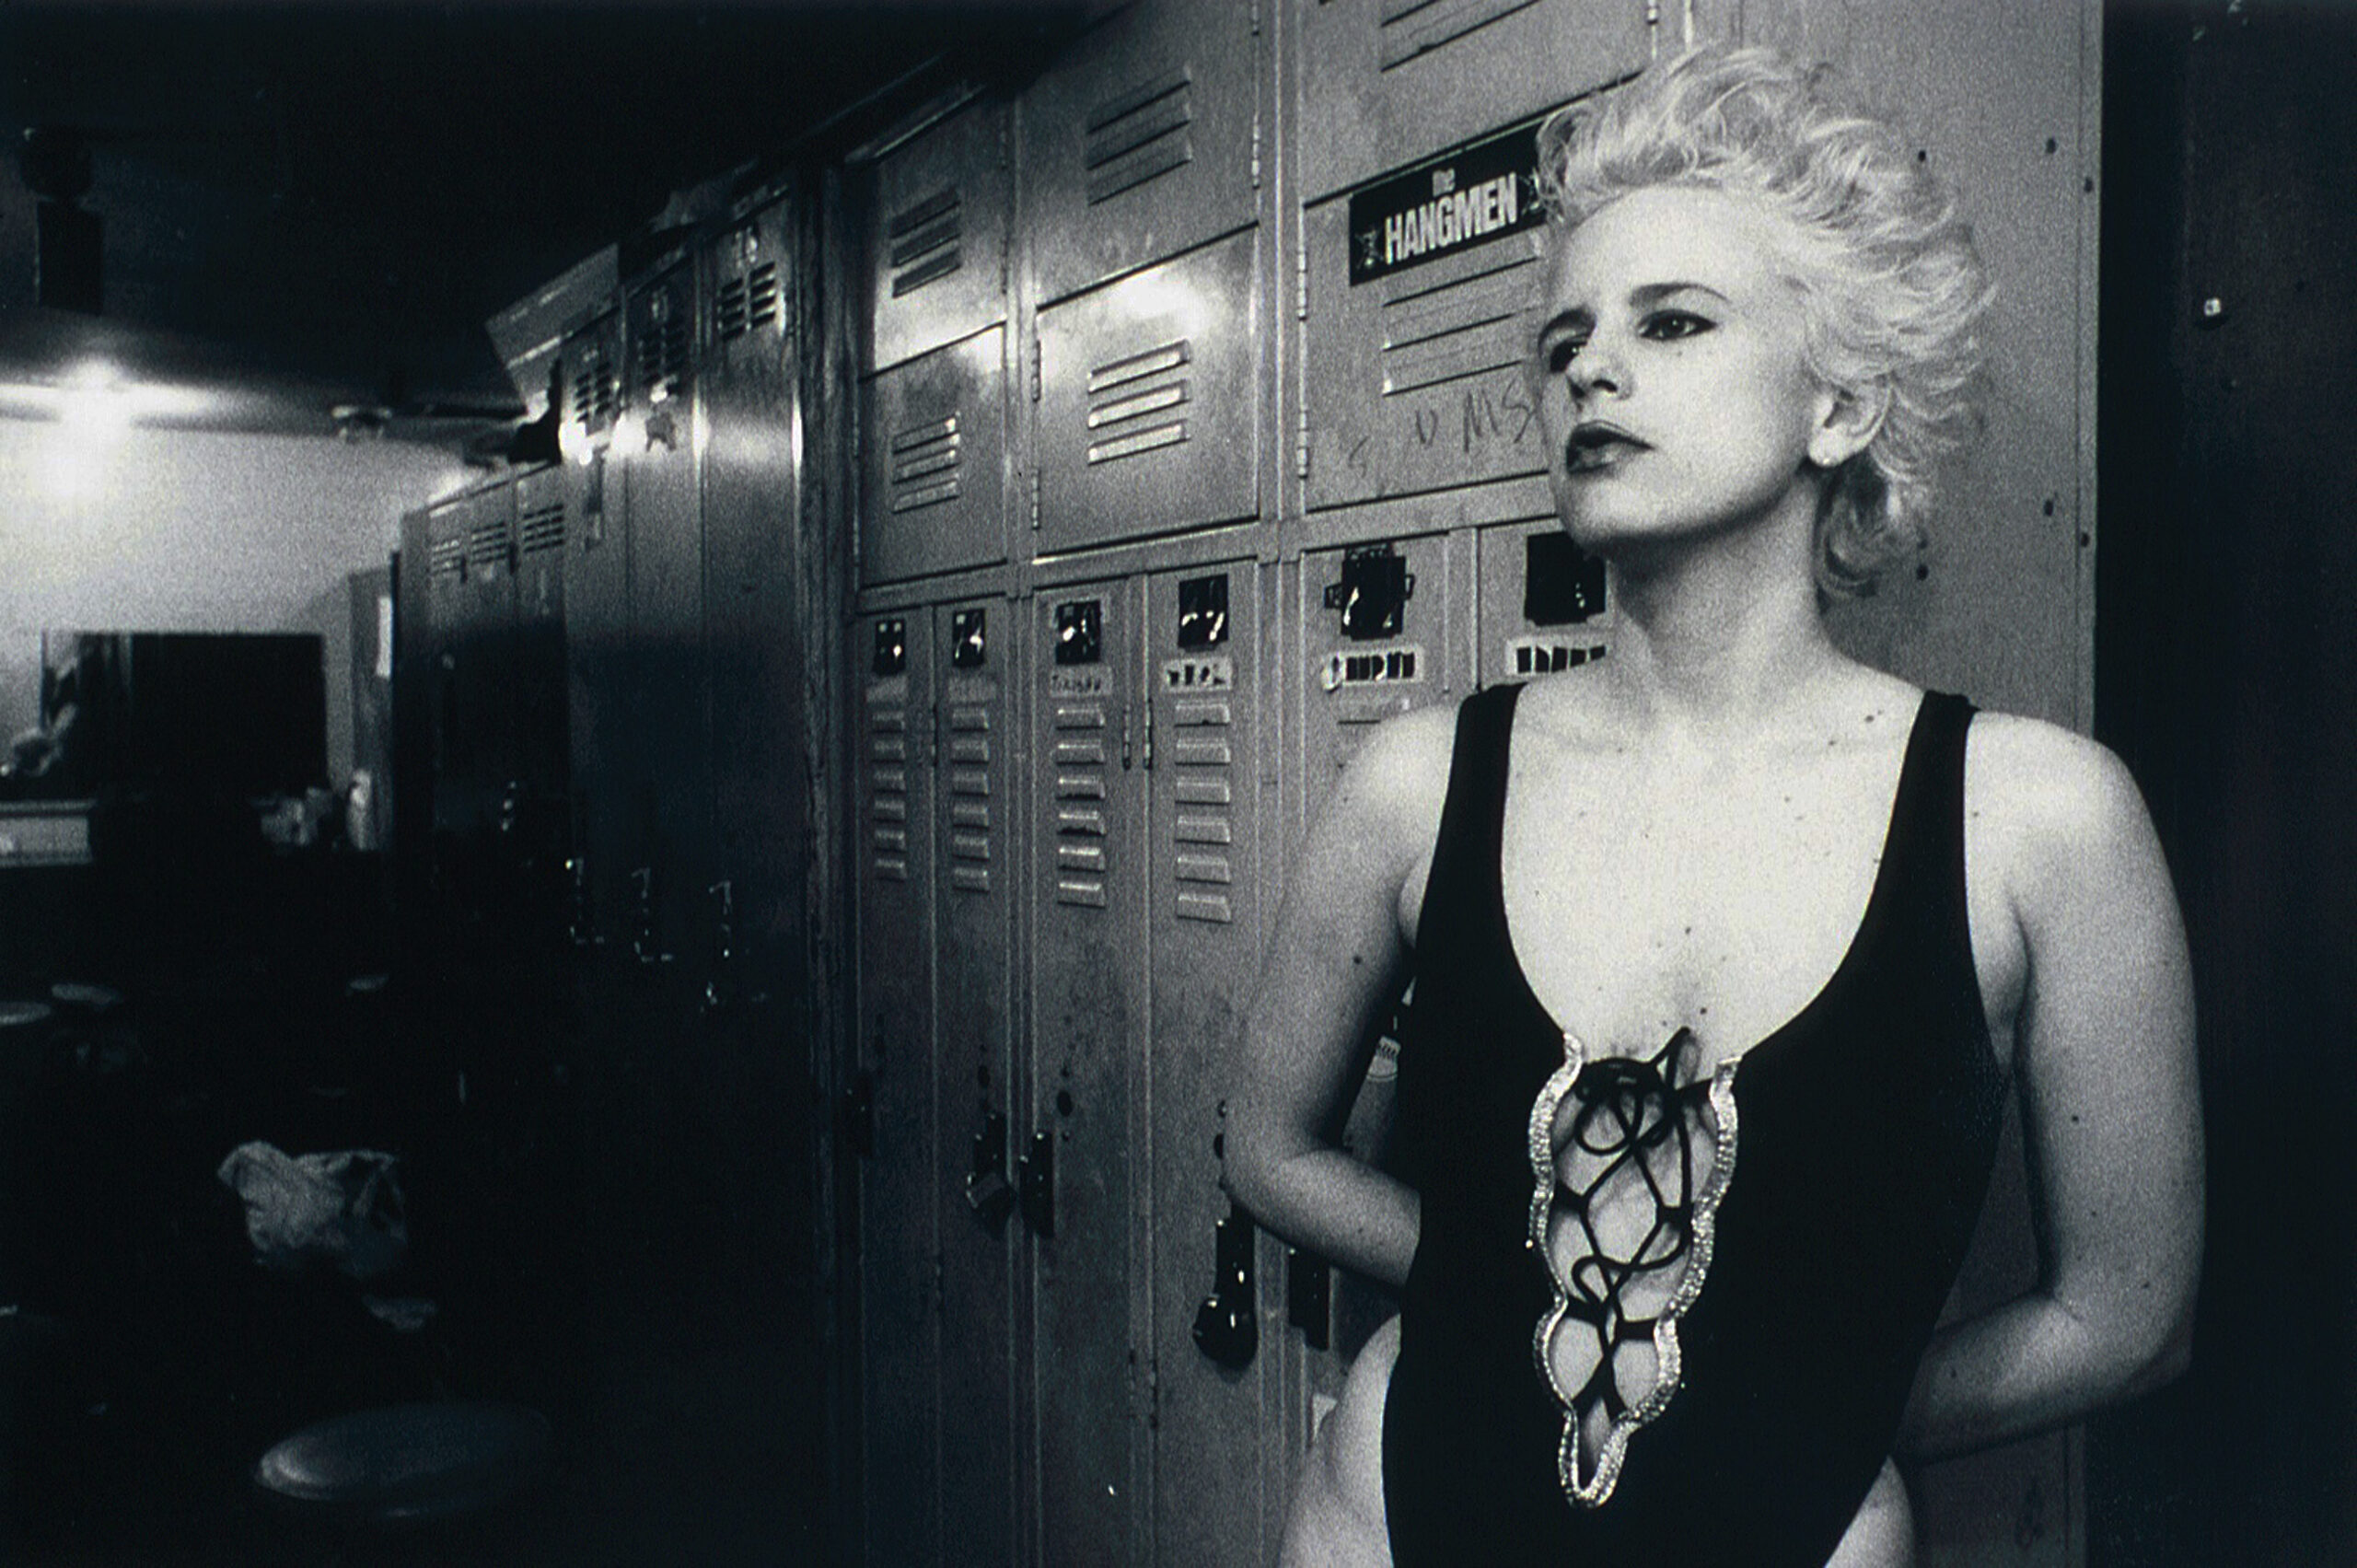 A platinum blonde woman stands in front of lockers, black and white image